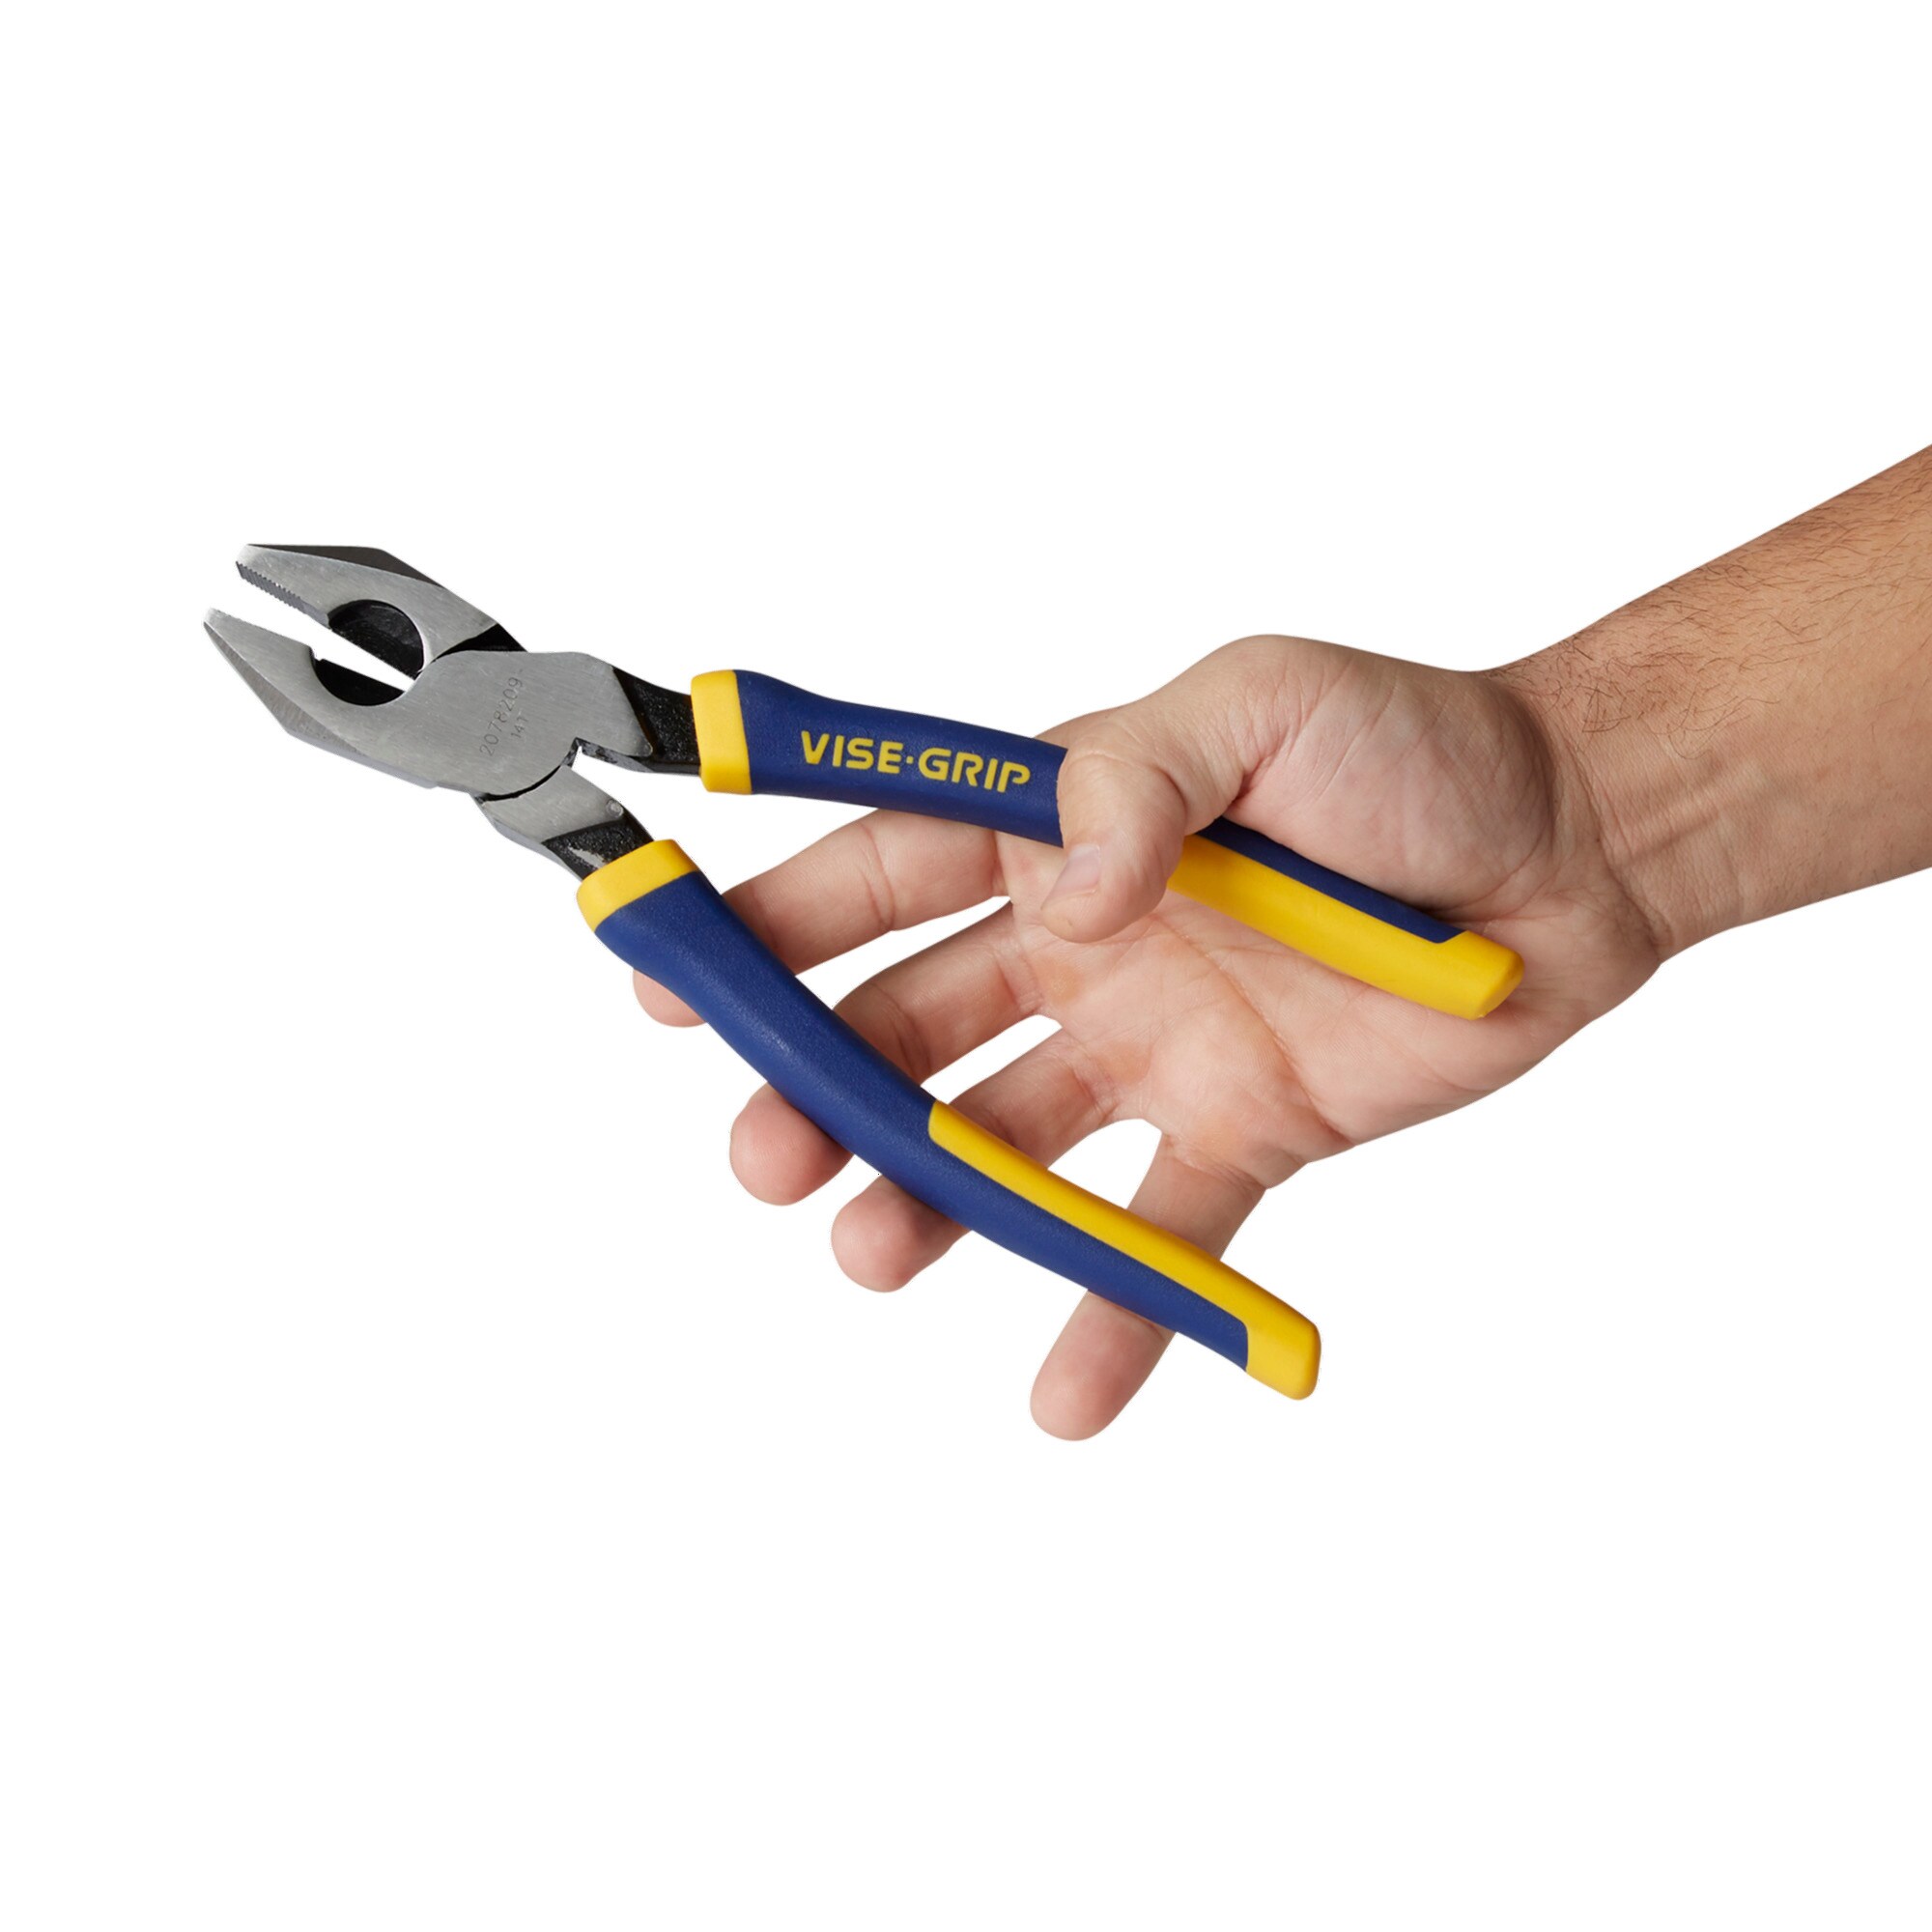 IRWIN VISE-GRIP 13.25-in Electrical Needle Nose Pliers in the